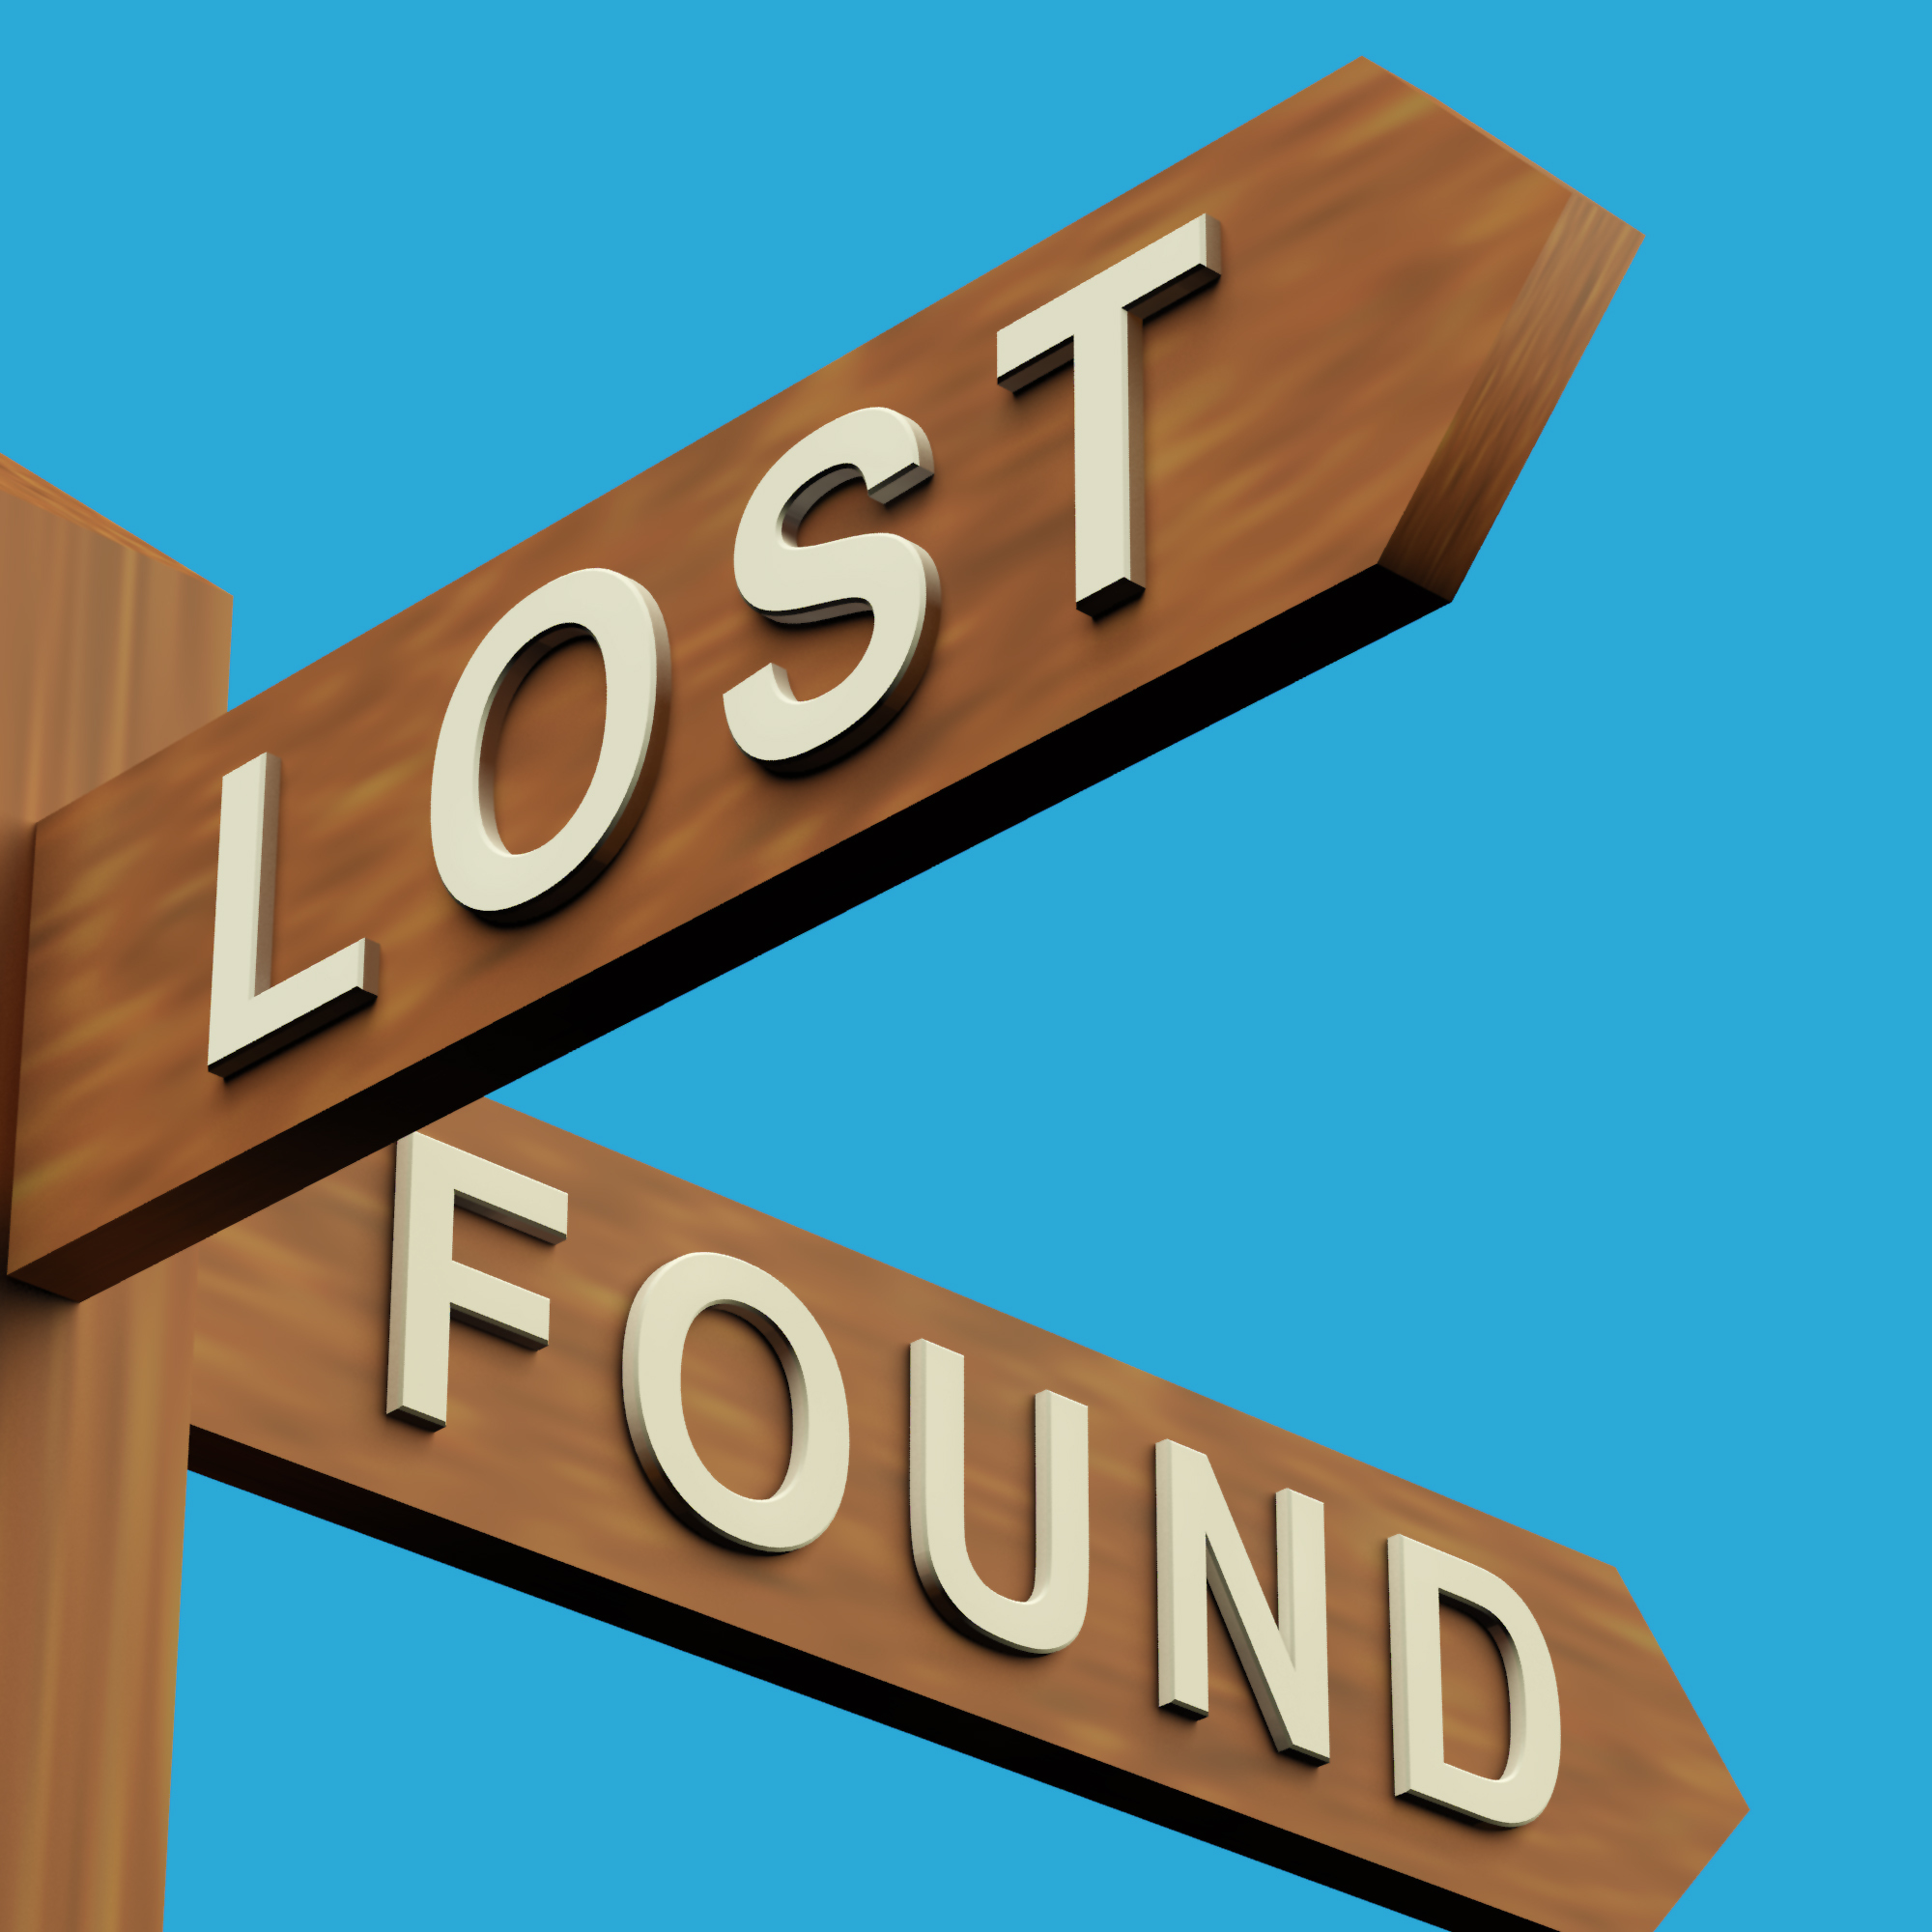 Lost and found photo